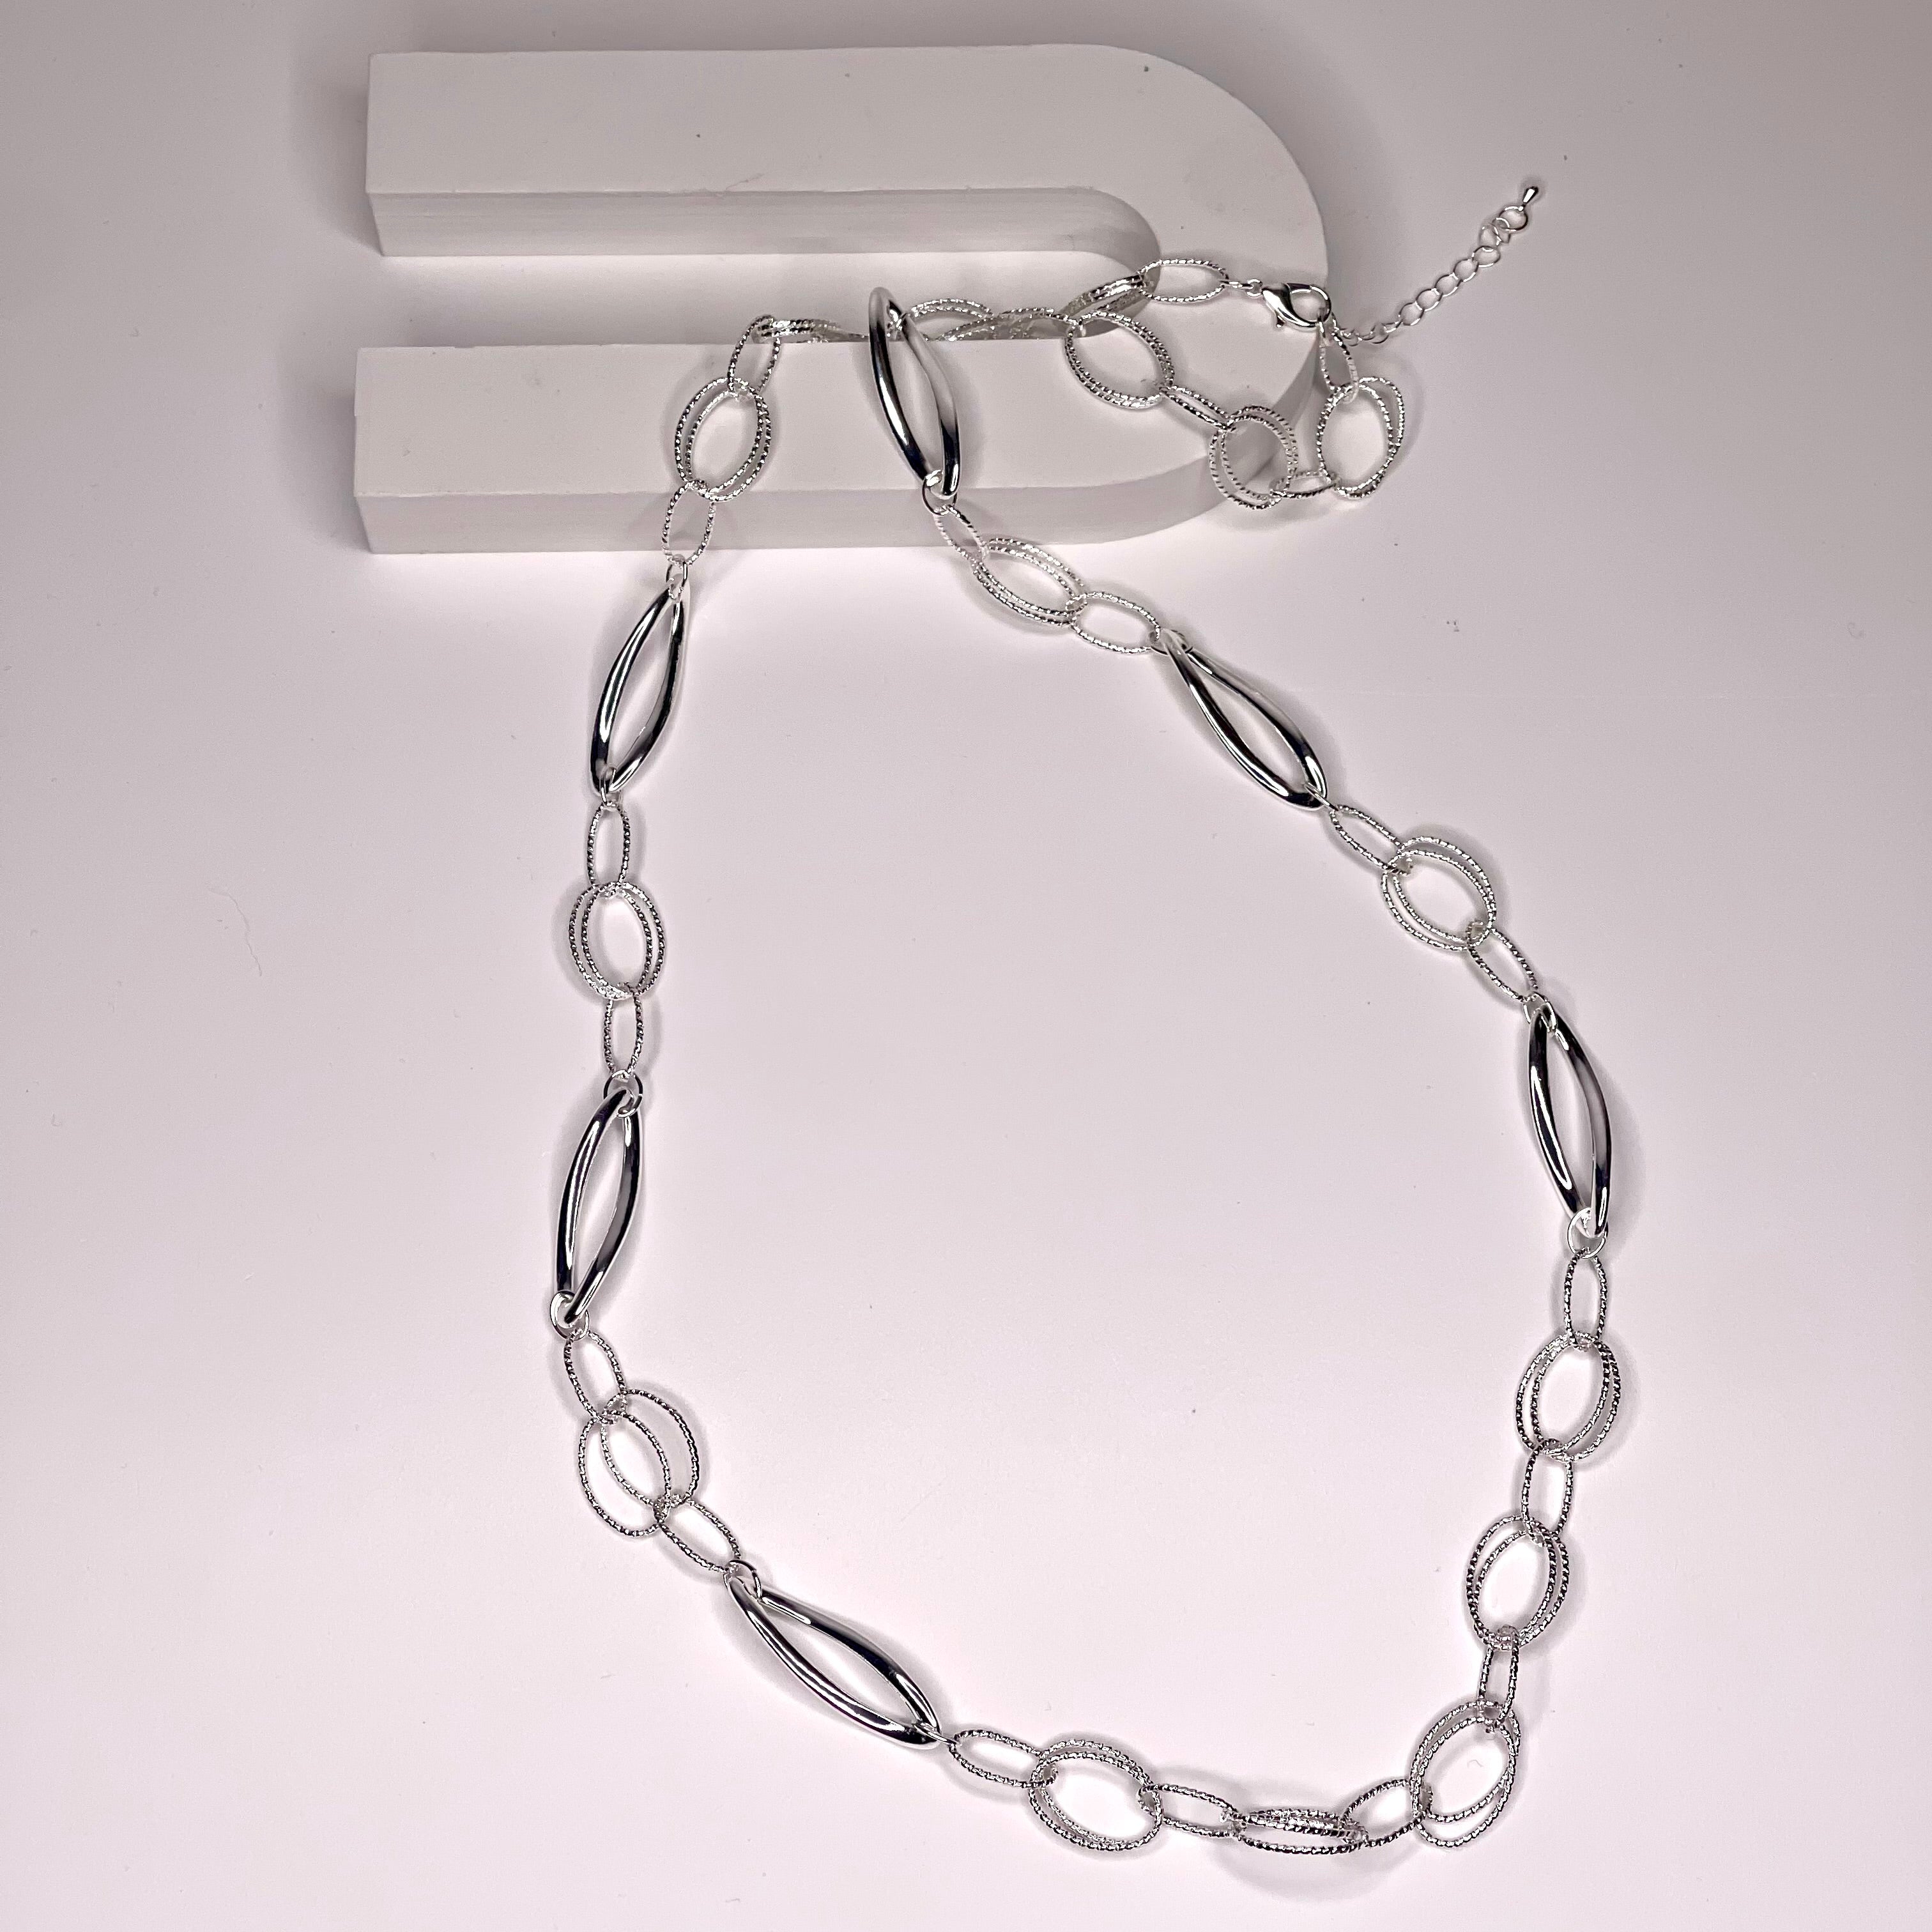 Long necklace, with silver interlinked circular loops